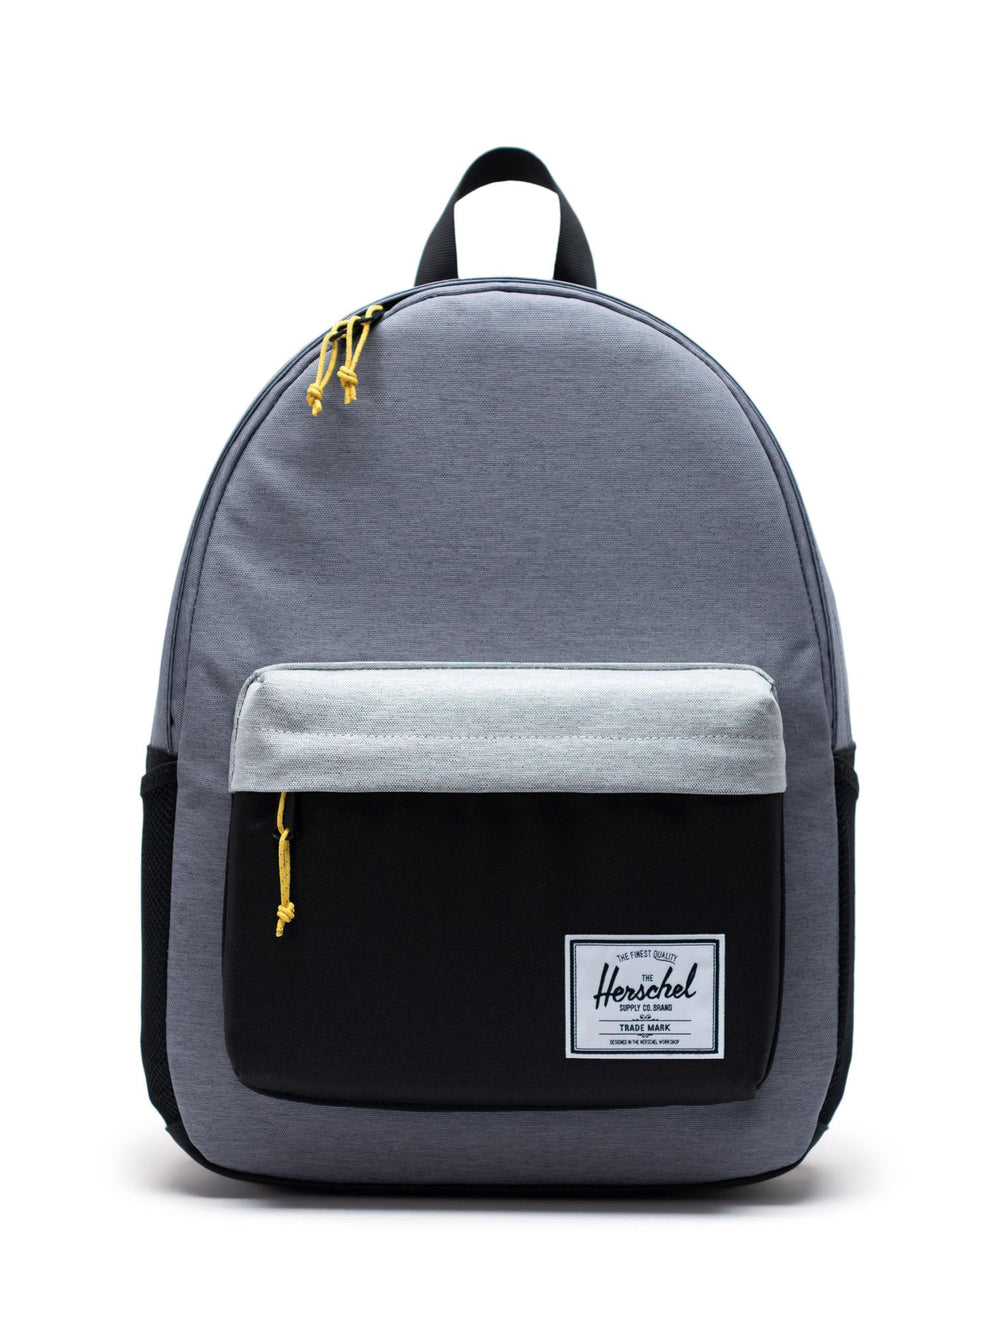 HERSCHEL SUPPLY CO. CLASSIC XL ATHLETIC 30L LOGO BACKPACK  - CLEARANCE